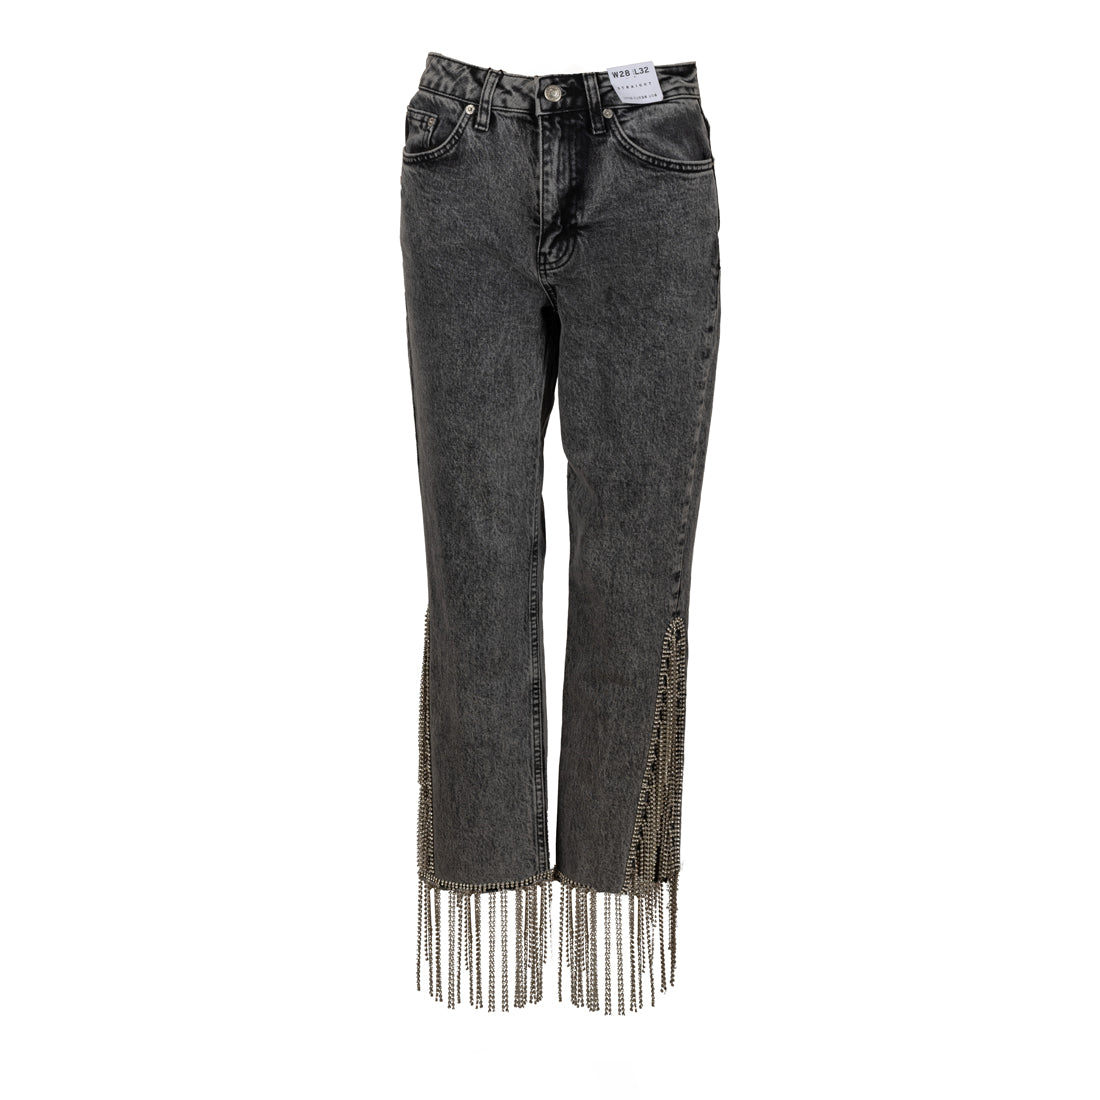 Top Shop Brand New High Waisted Straight Leg Jeans